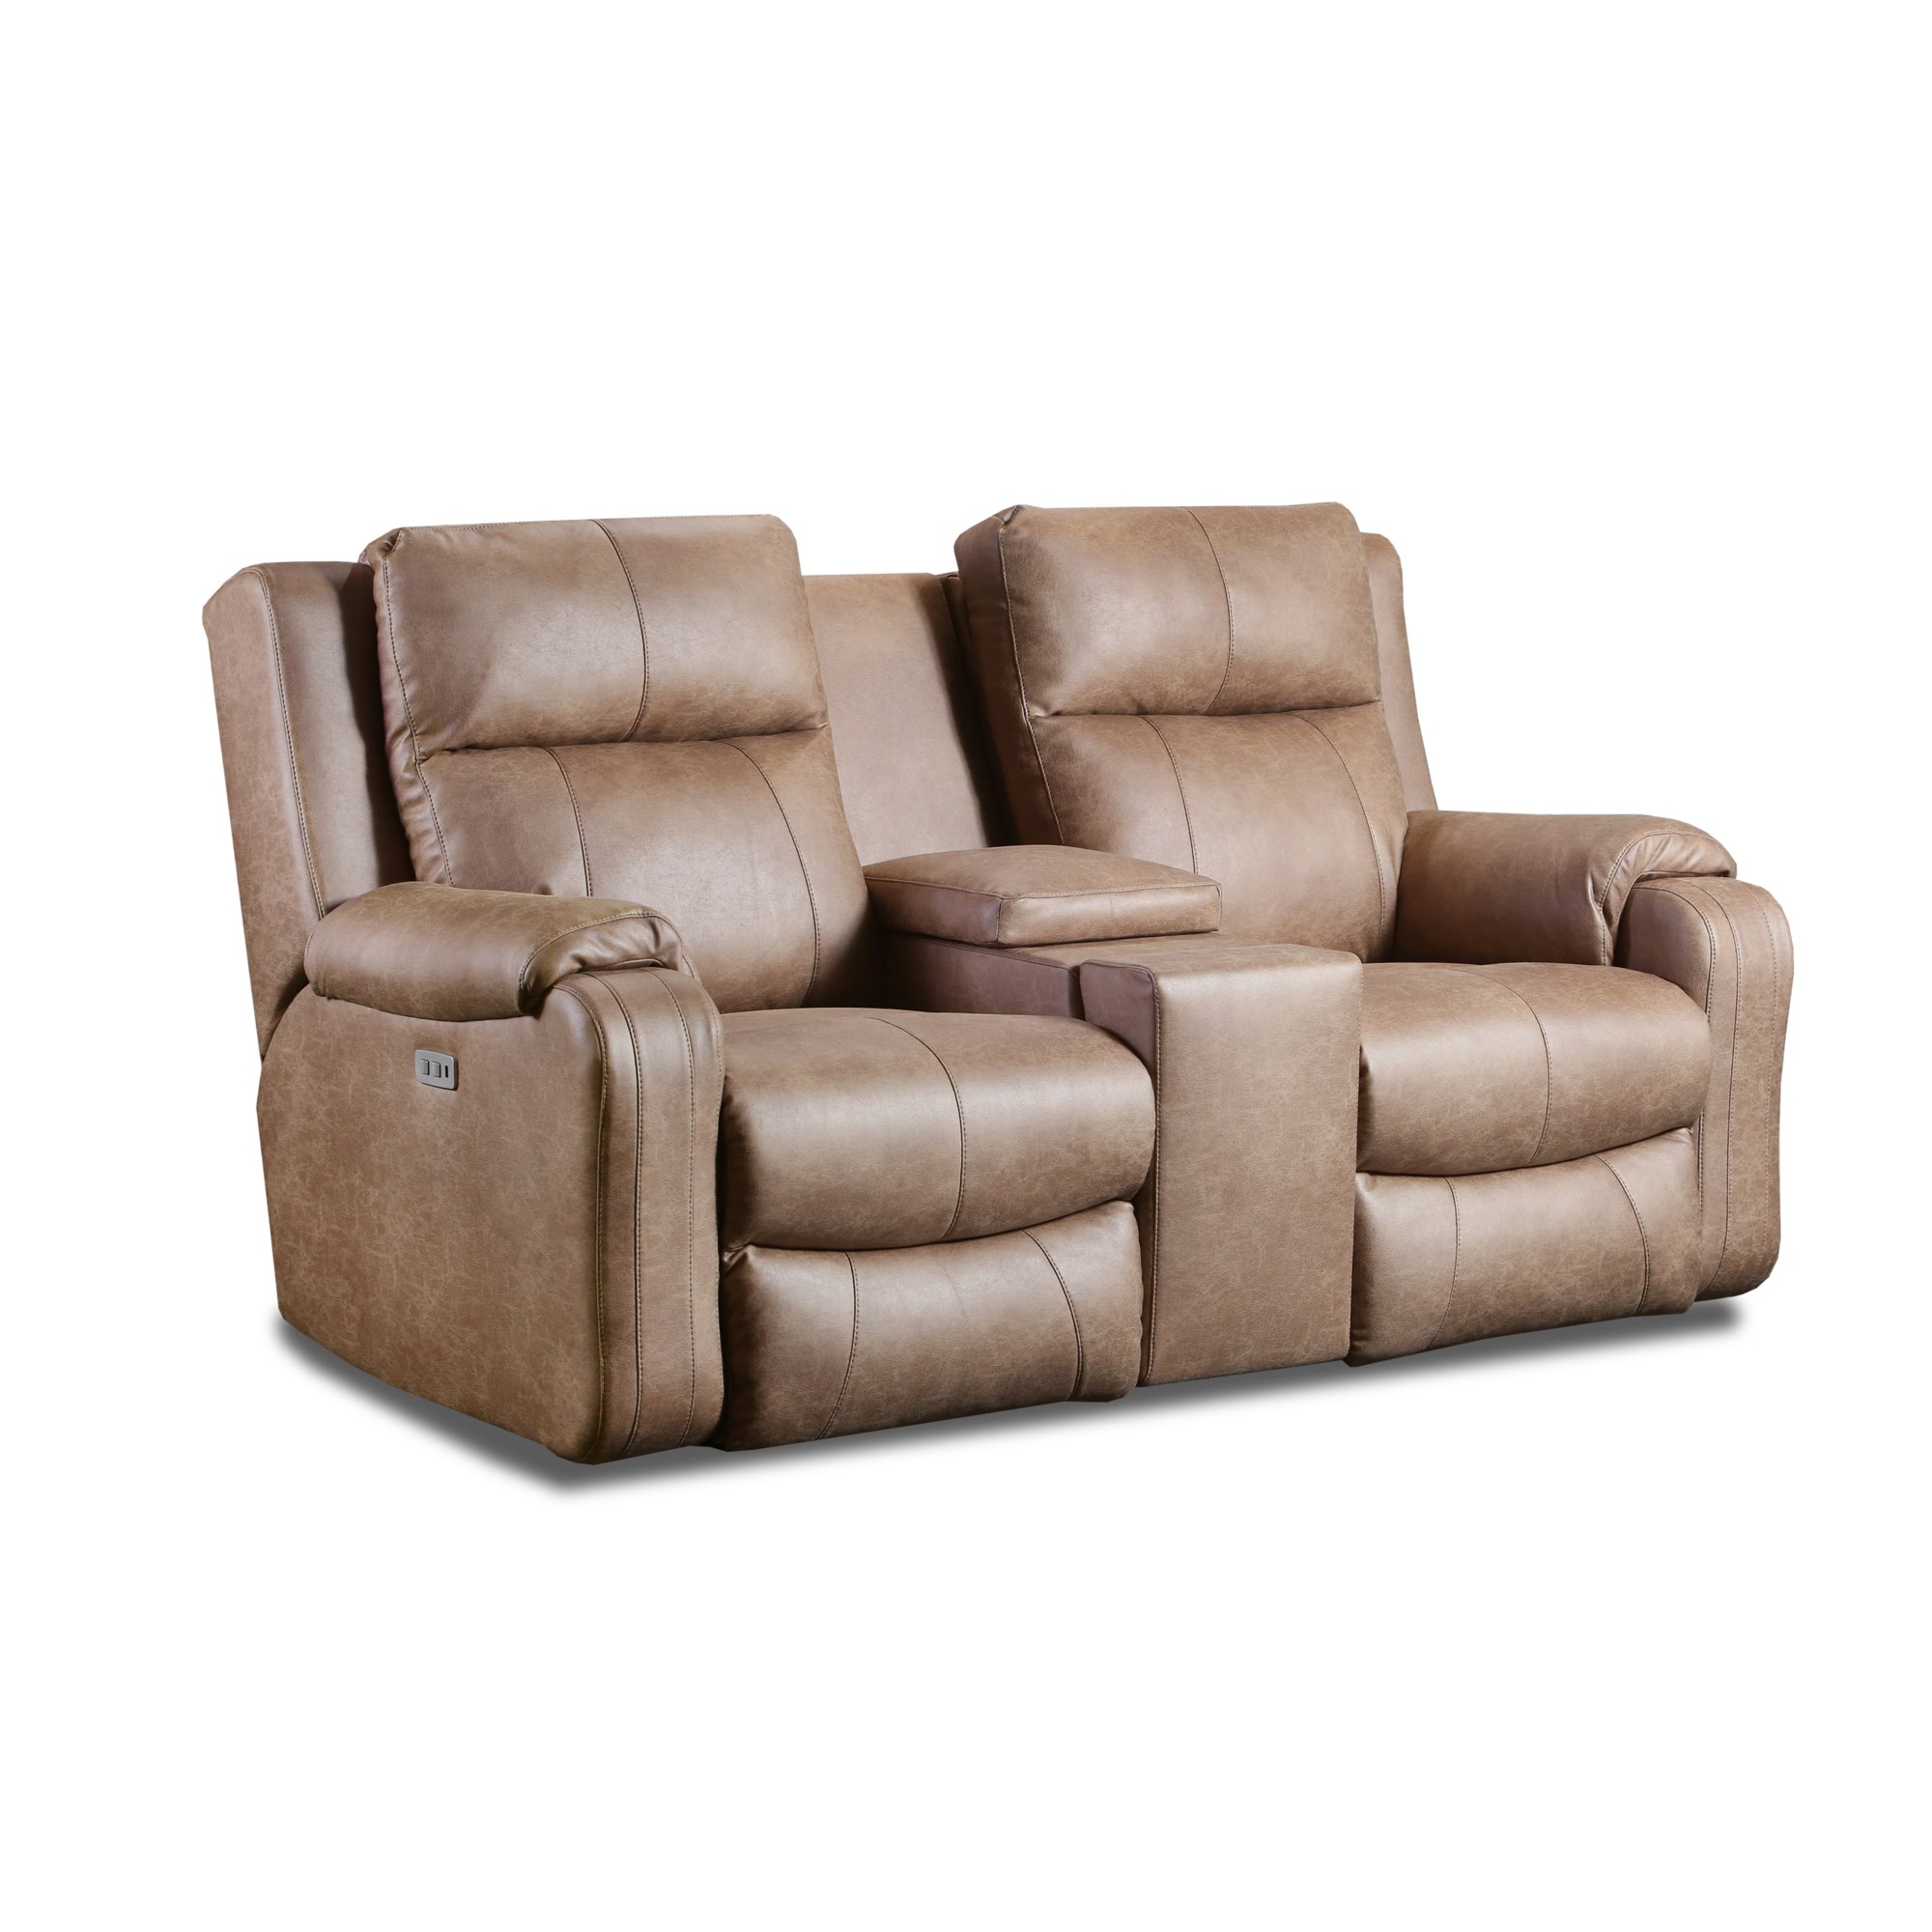 Southern Motion Contour 381-78P NL 167-16 Power Reclining Loveseat